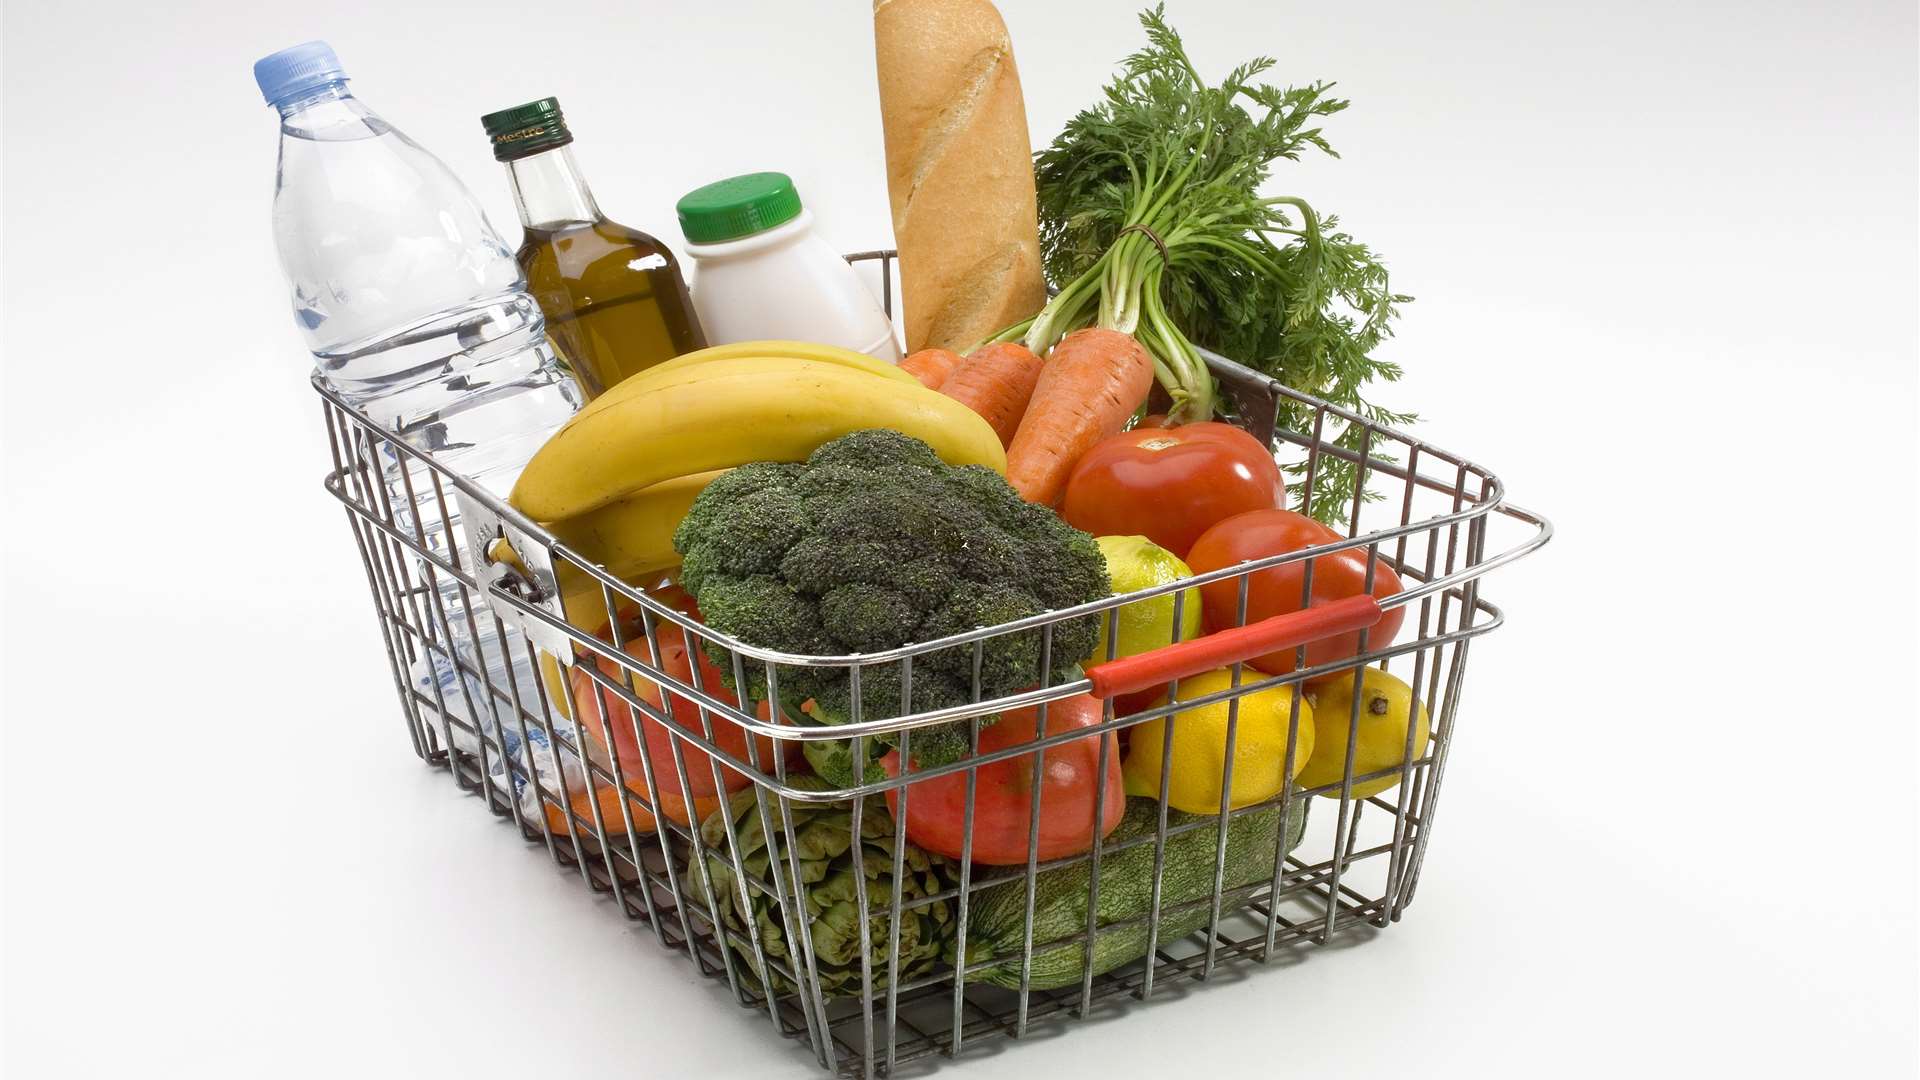 Food that doesn't end up in people's shopping baskets will be offered to good causes